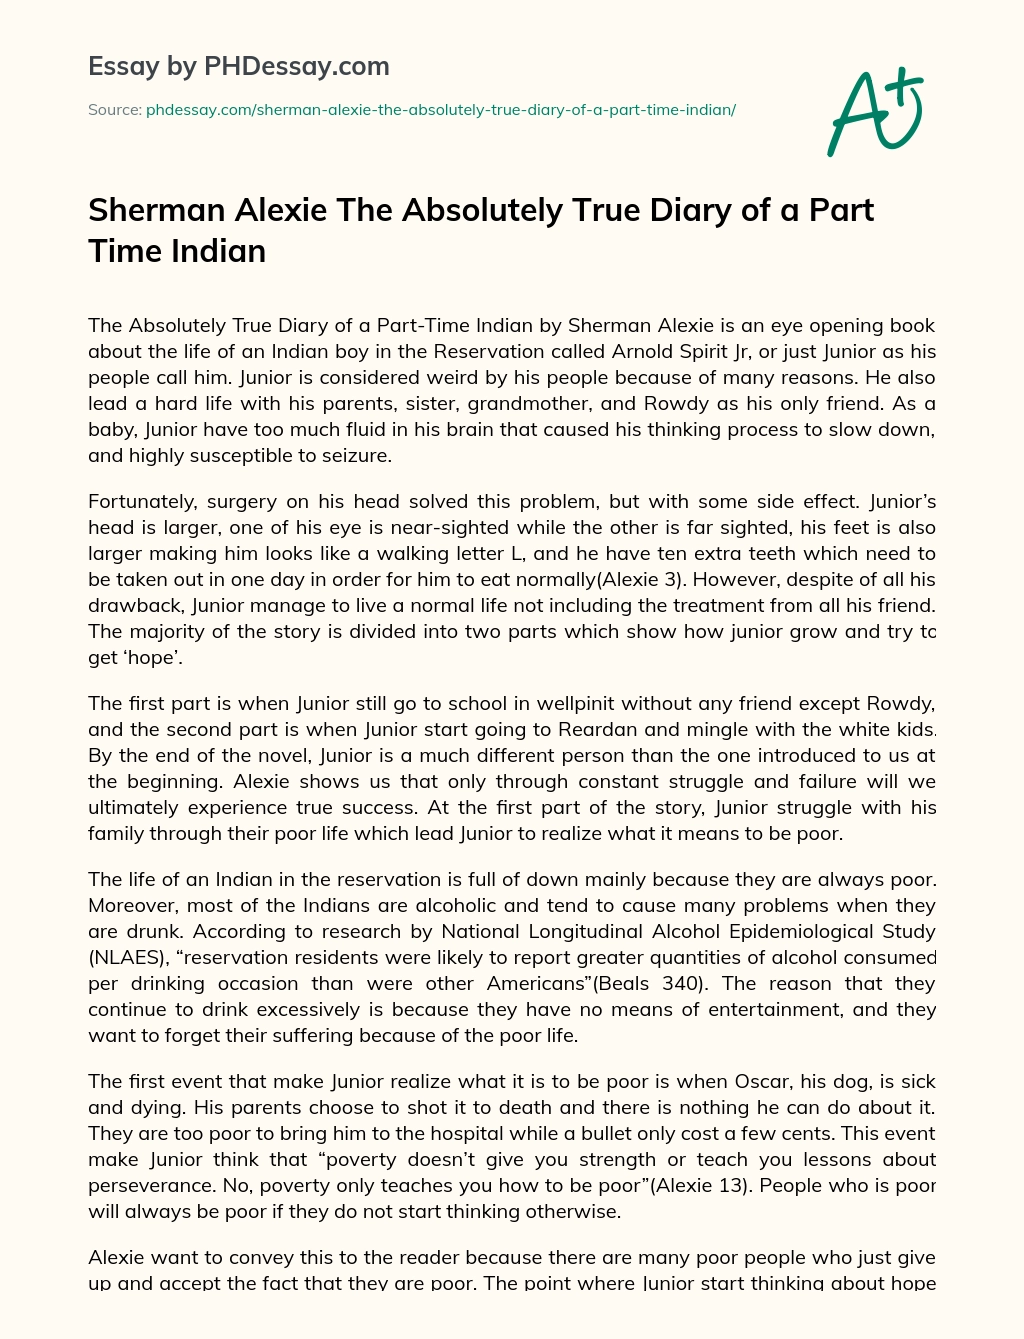 Sherman Alexie The Absolutely True Diary of a Part Time Indian essay